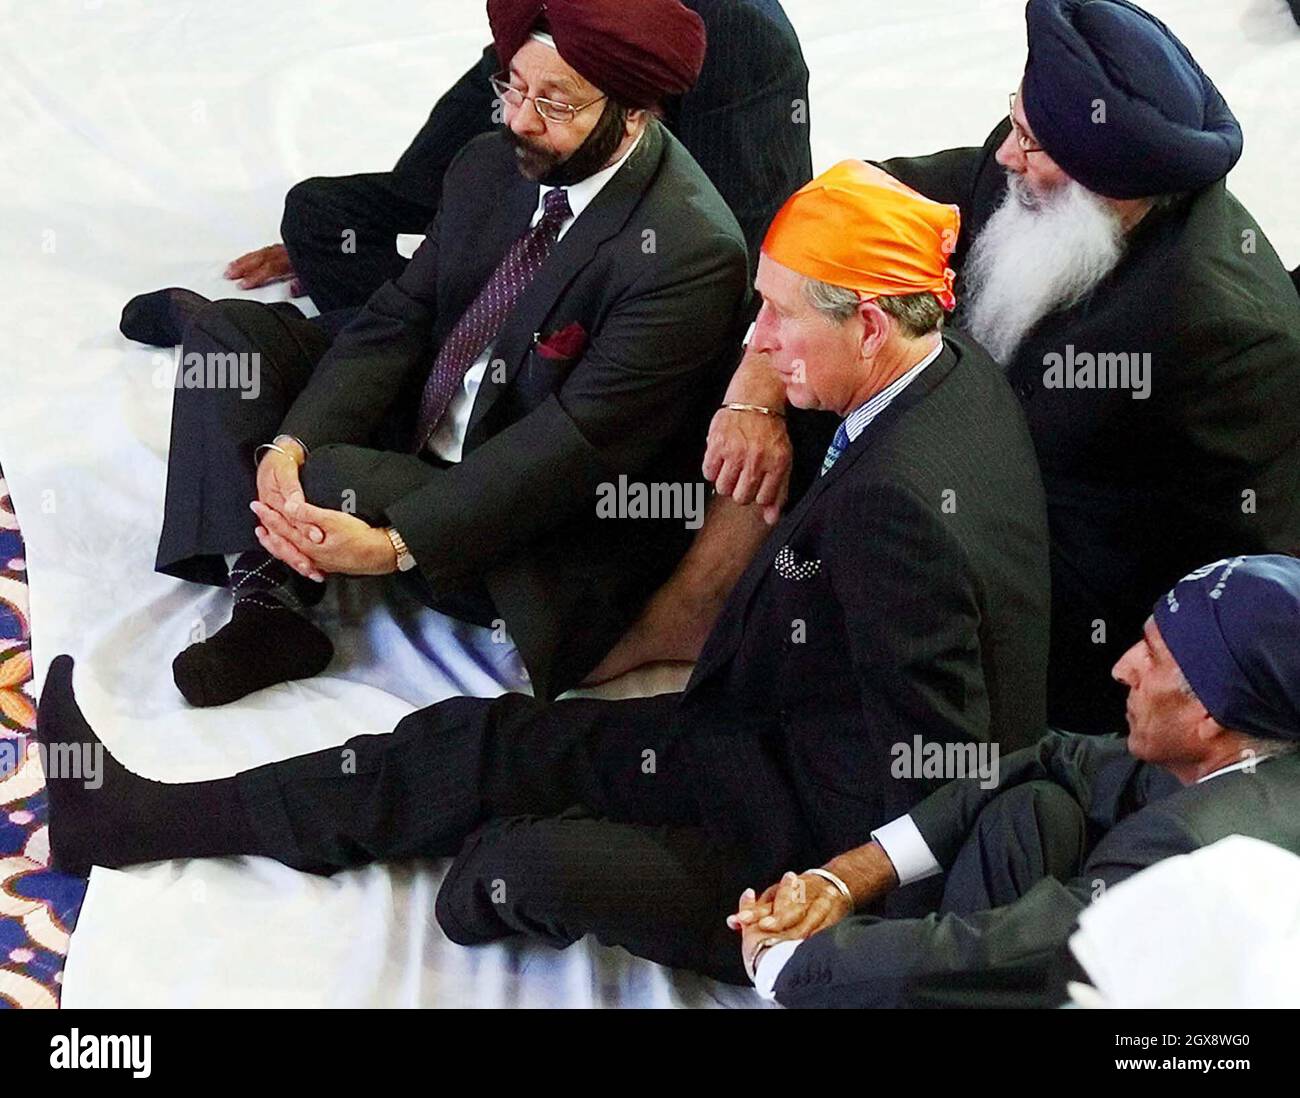 The Prince of Wales walks through crowds of Sikh worshippers at the Sri Guru Singh Sabha Gurdwara Temple, in Southall, England during a visit to the Temple. Â©Anwar Hussein/allaction.co.uk  Stock Photo